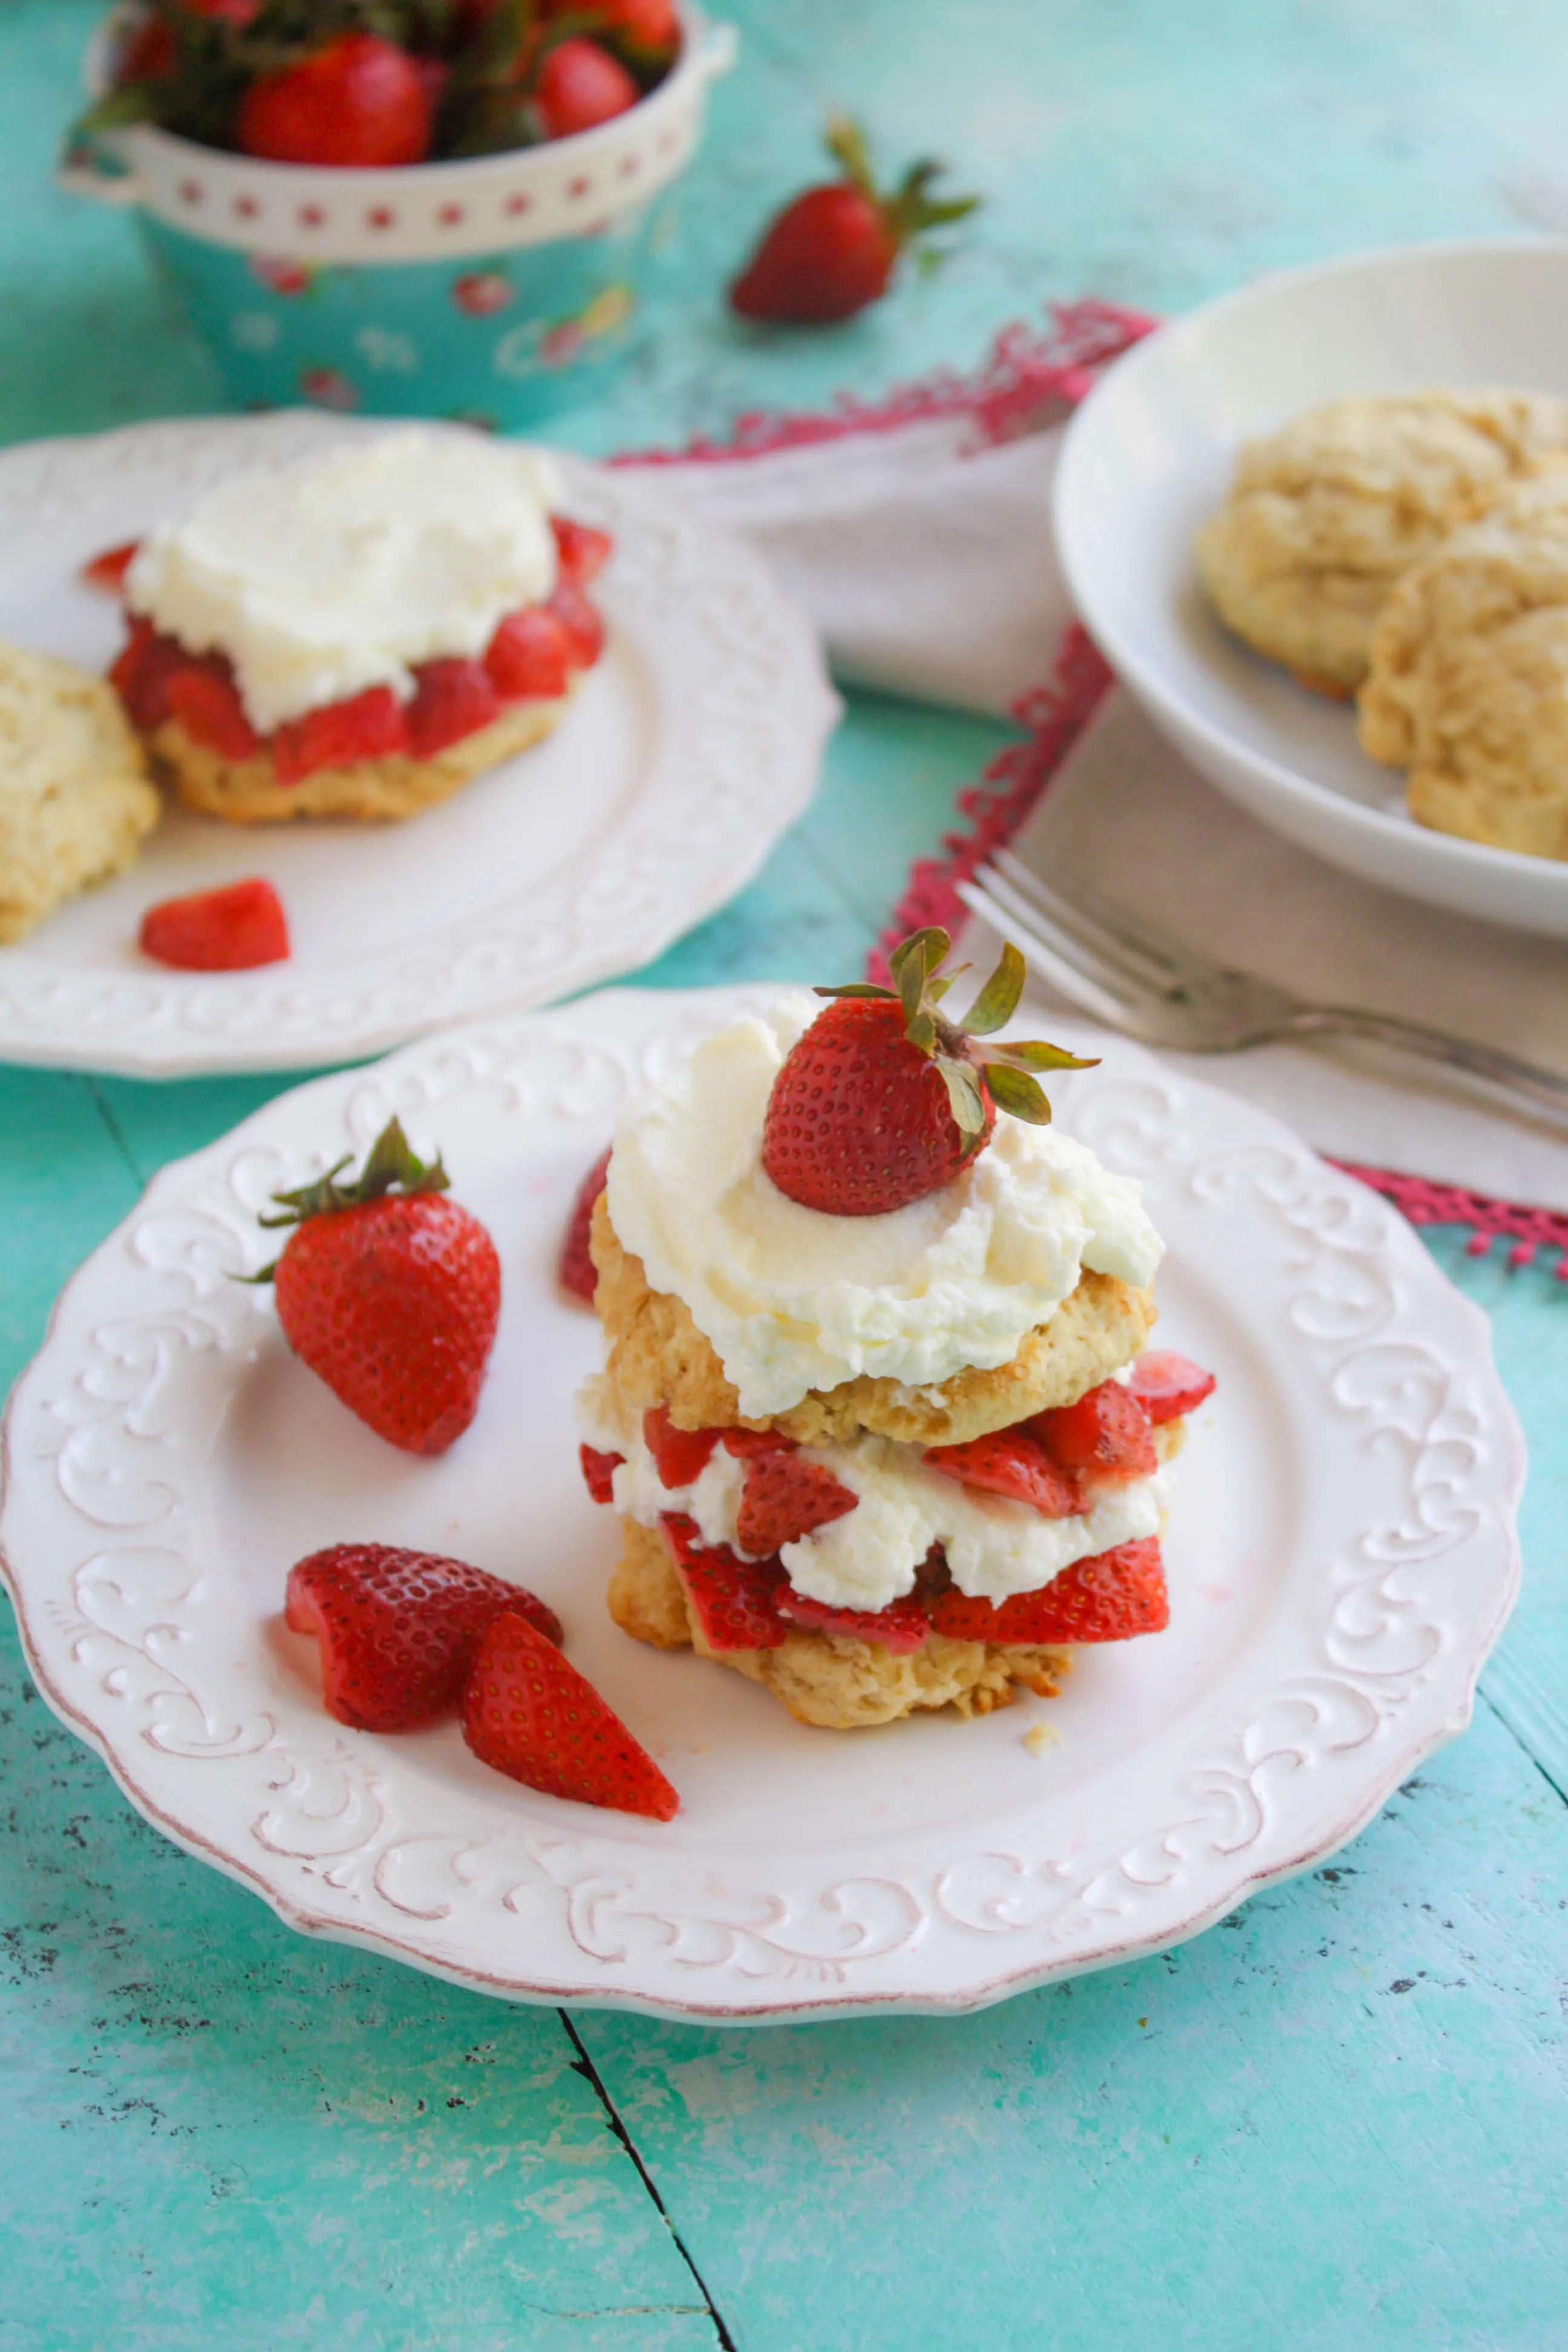 Ginger-Strawberry Shortcakes with Whipped Topping make a fabulous dessert! Ginger-Strawberry Shortcakes with Whipped Topping have all the makings of a lovely dessert!